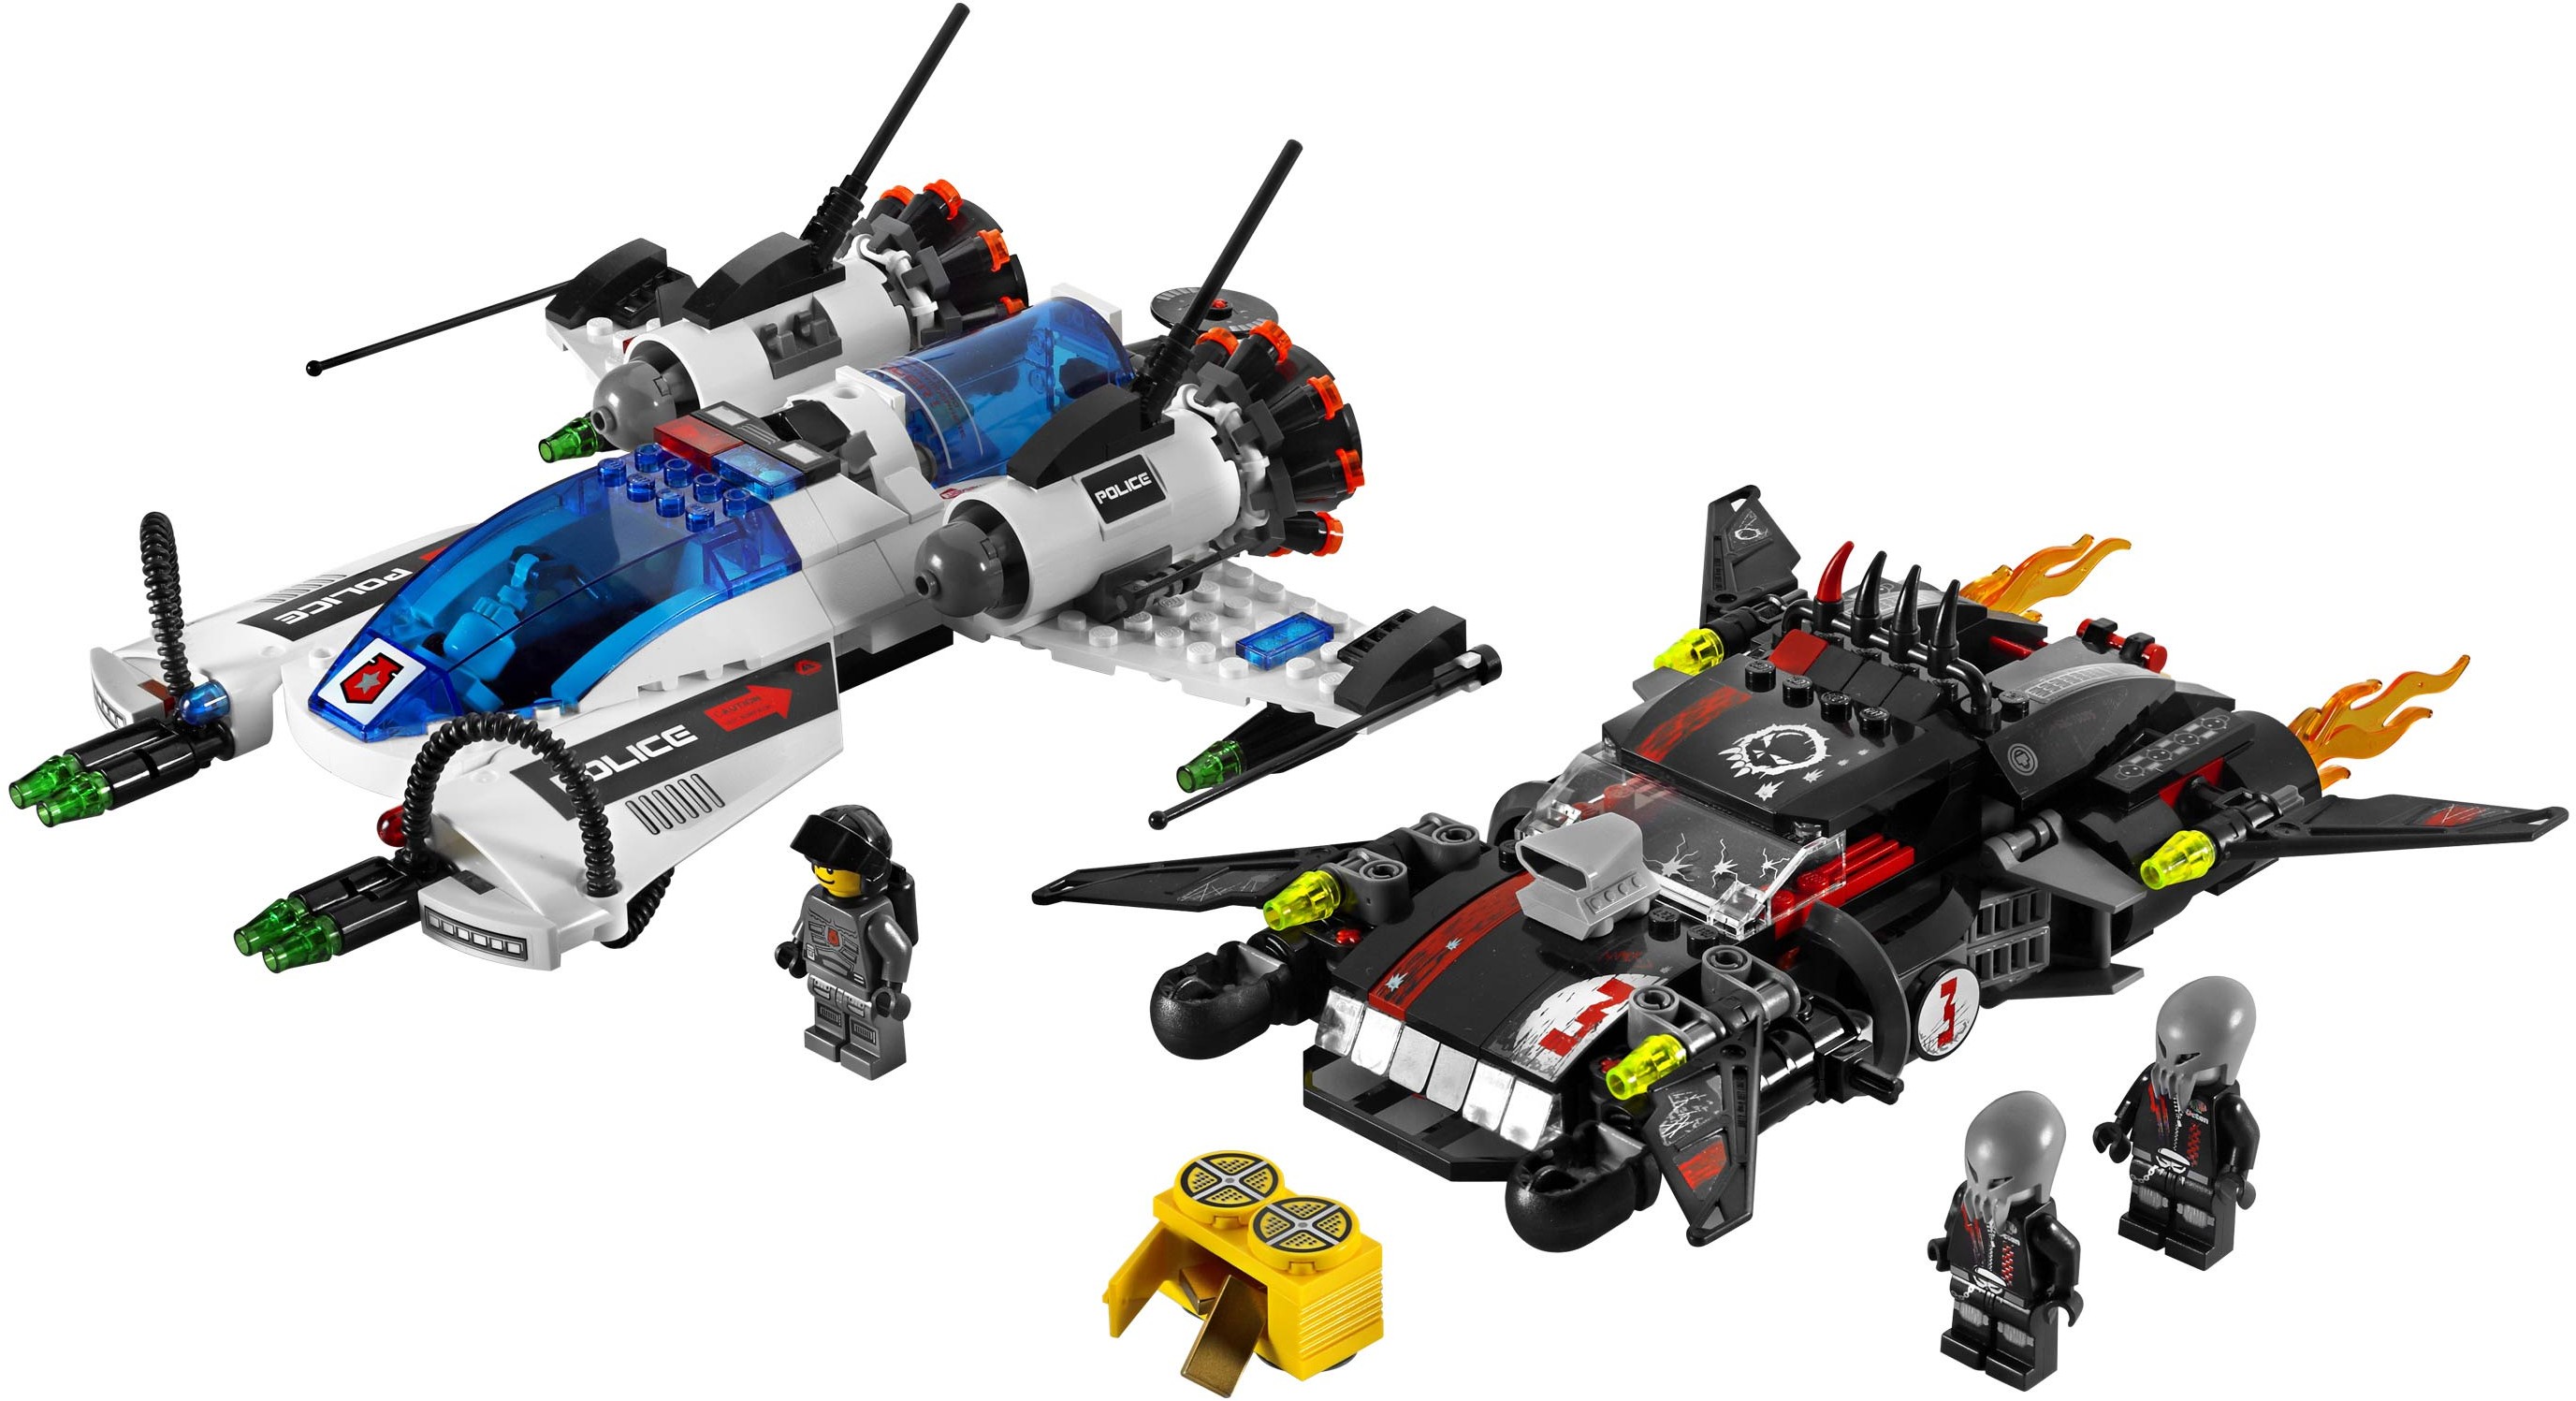 lego space police